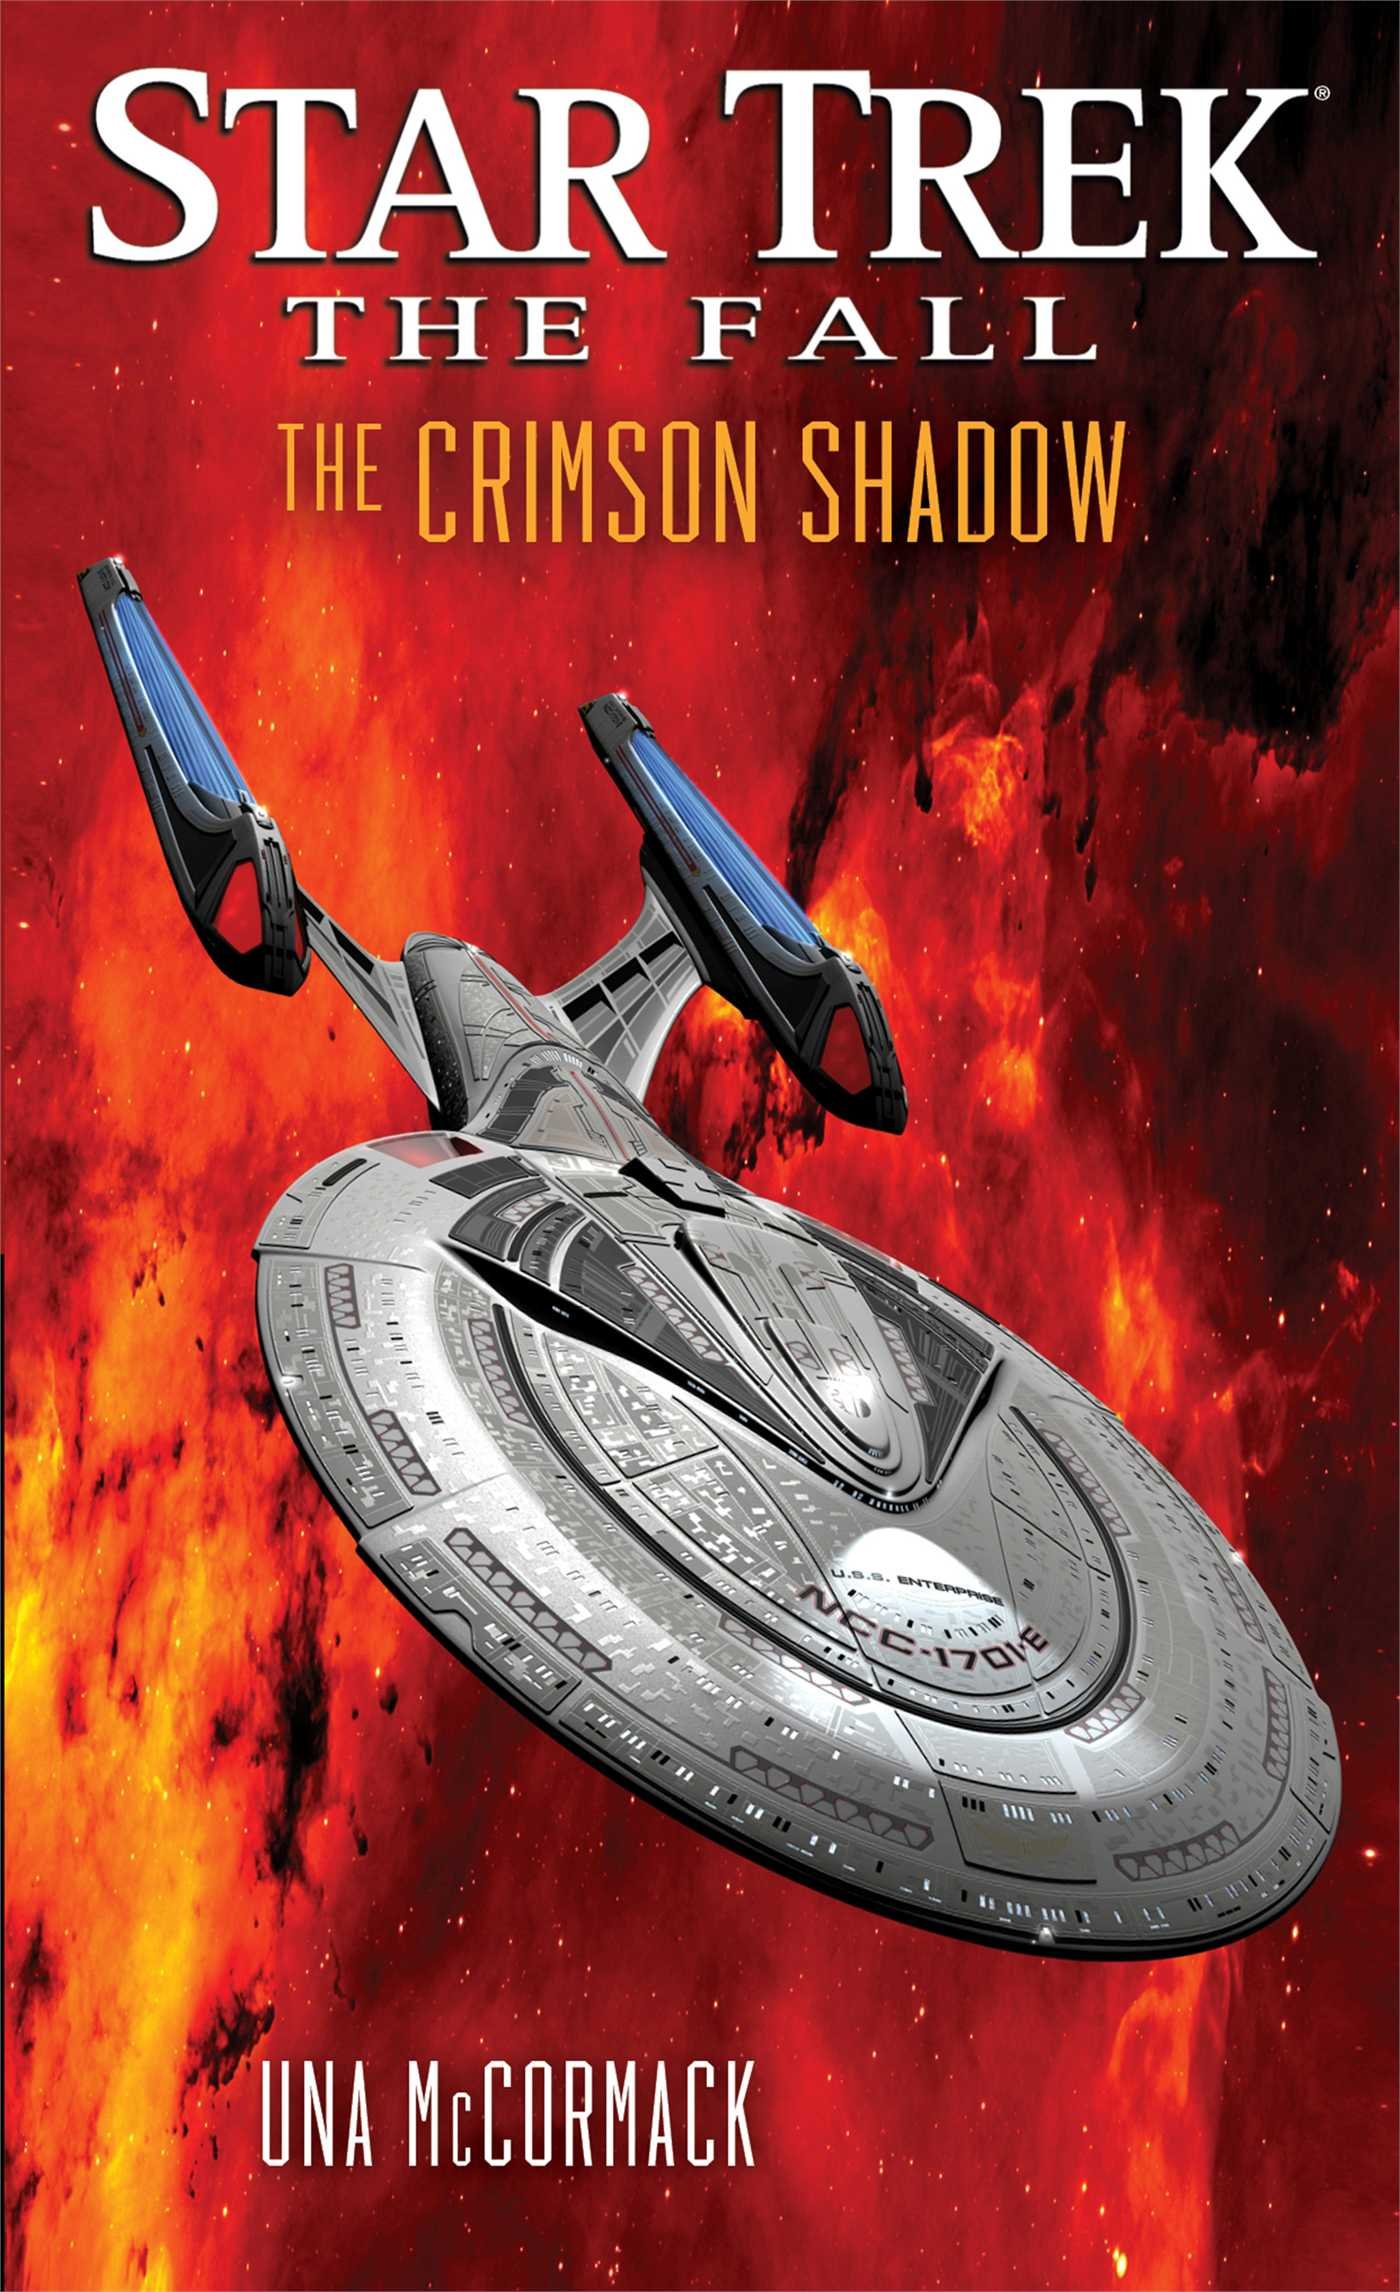 “Star Trek: The Fall: The Crimson Shadow” Review by Lessaccurategrandmother.blogspot.com